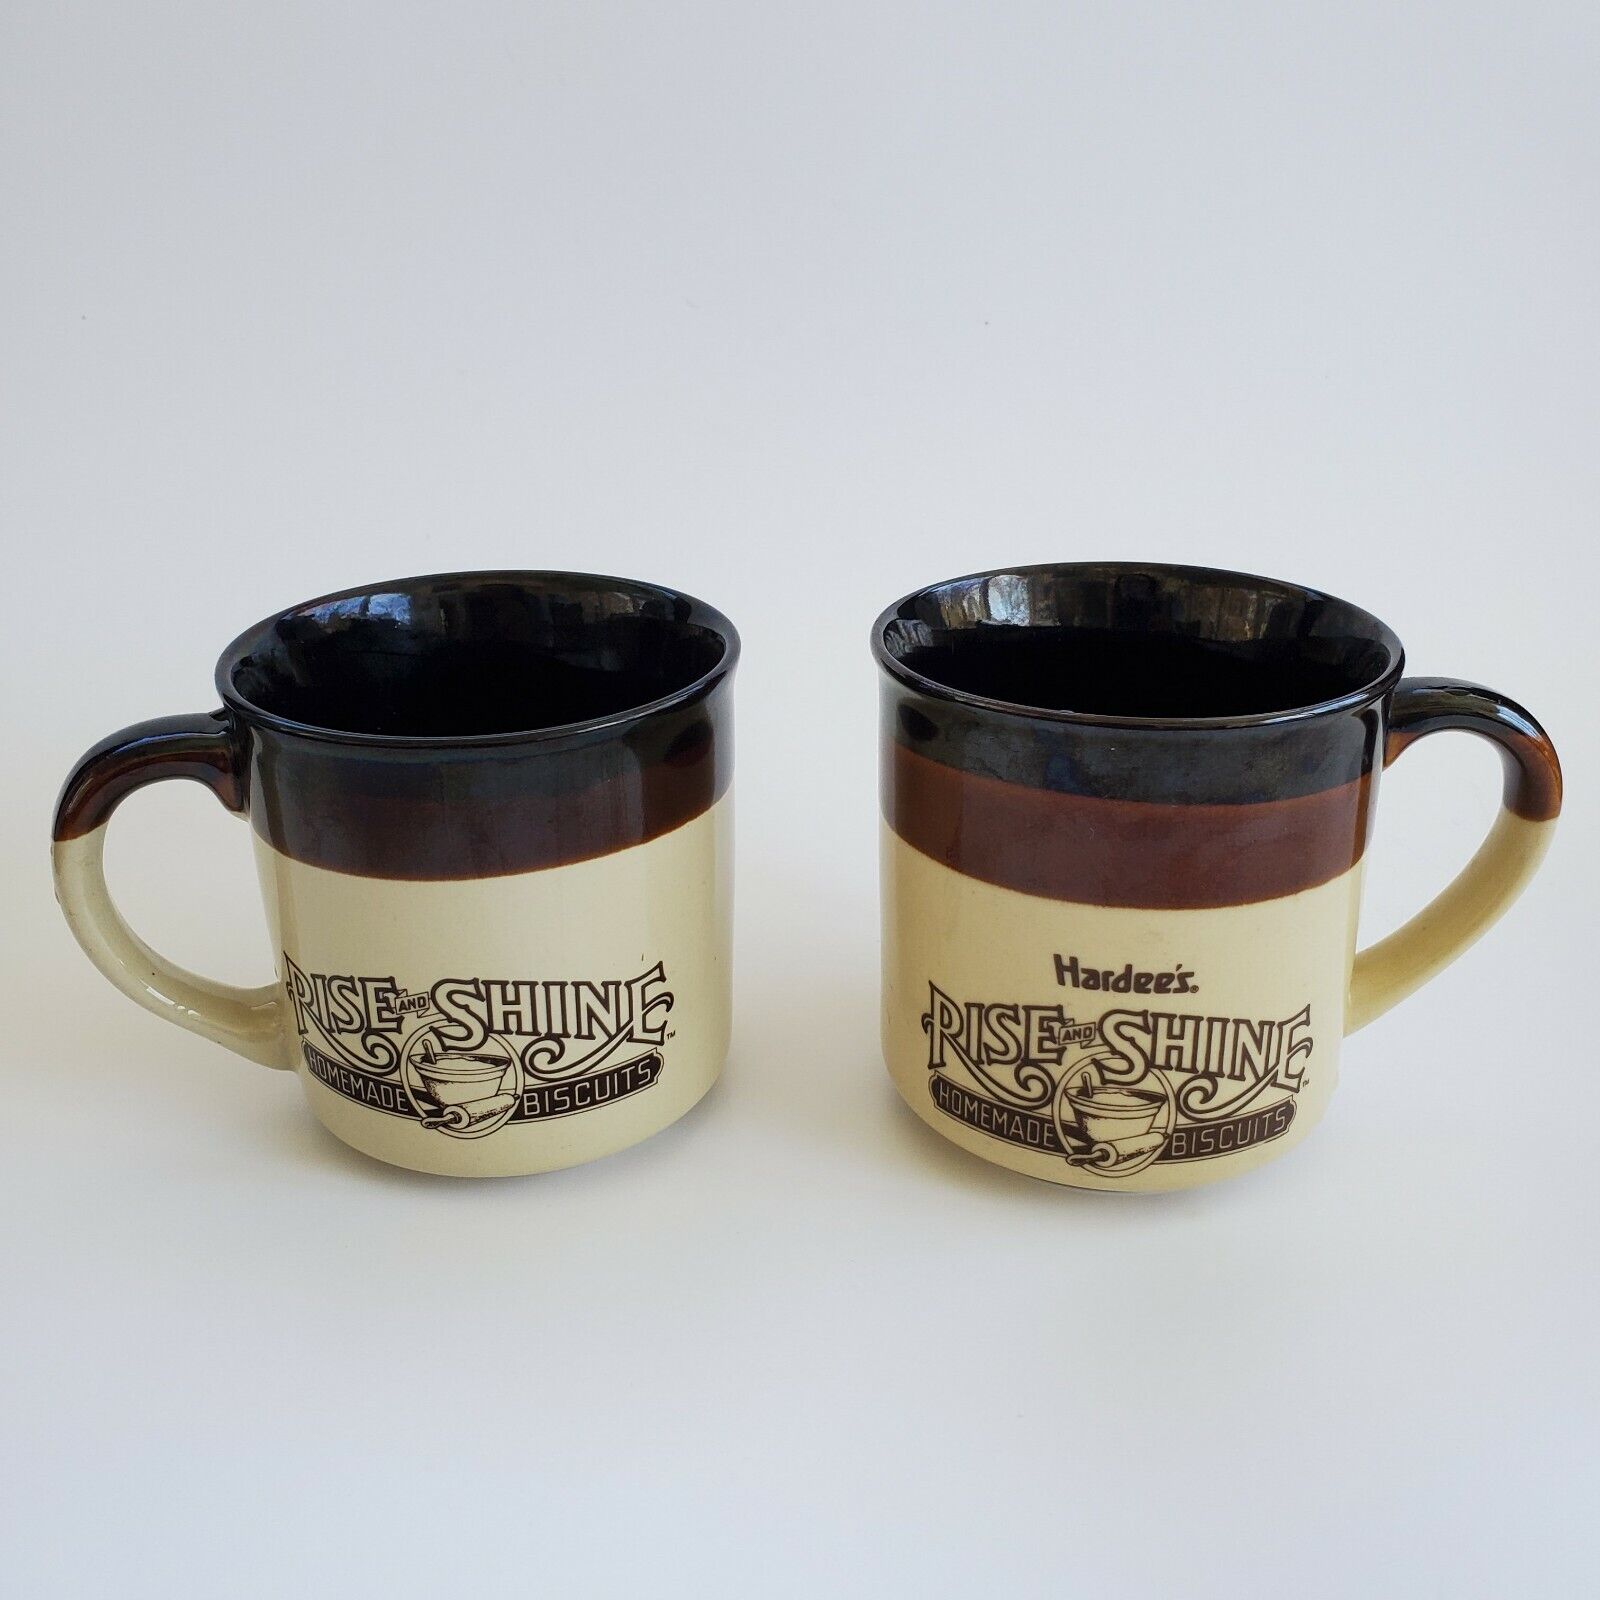 VTG 1984 & 1989 Hardees Rise and Shine Homemade Biscuits Coffee Cups Mugs Brown